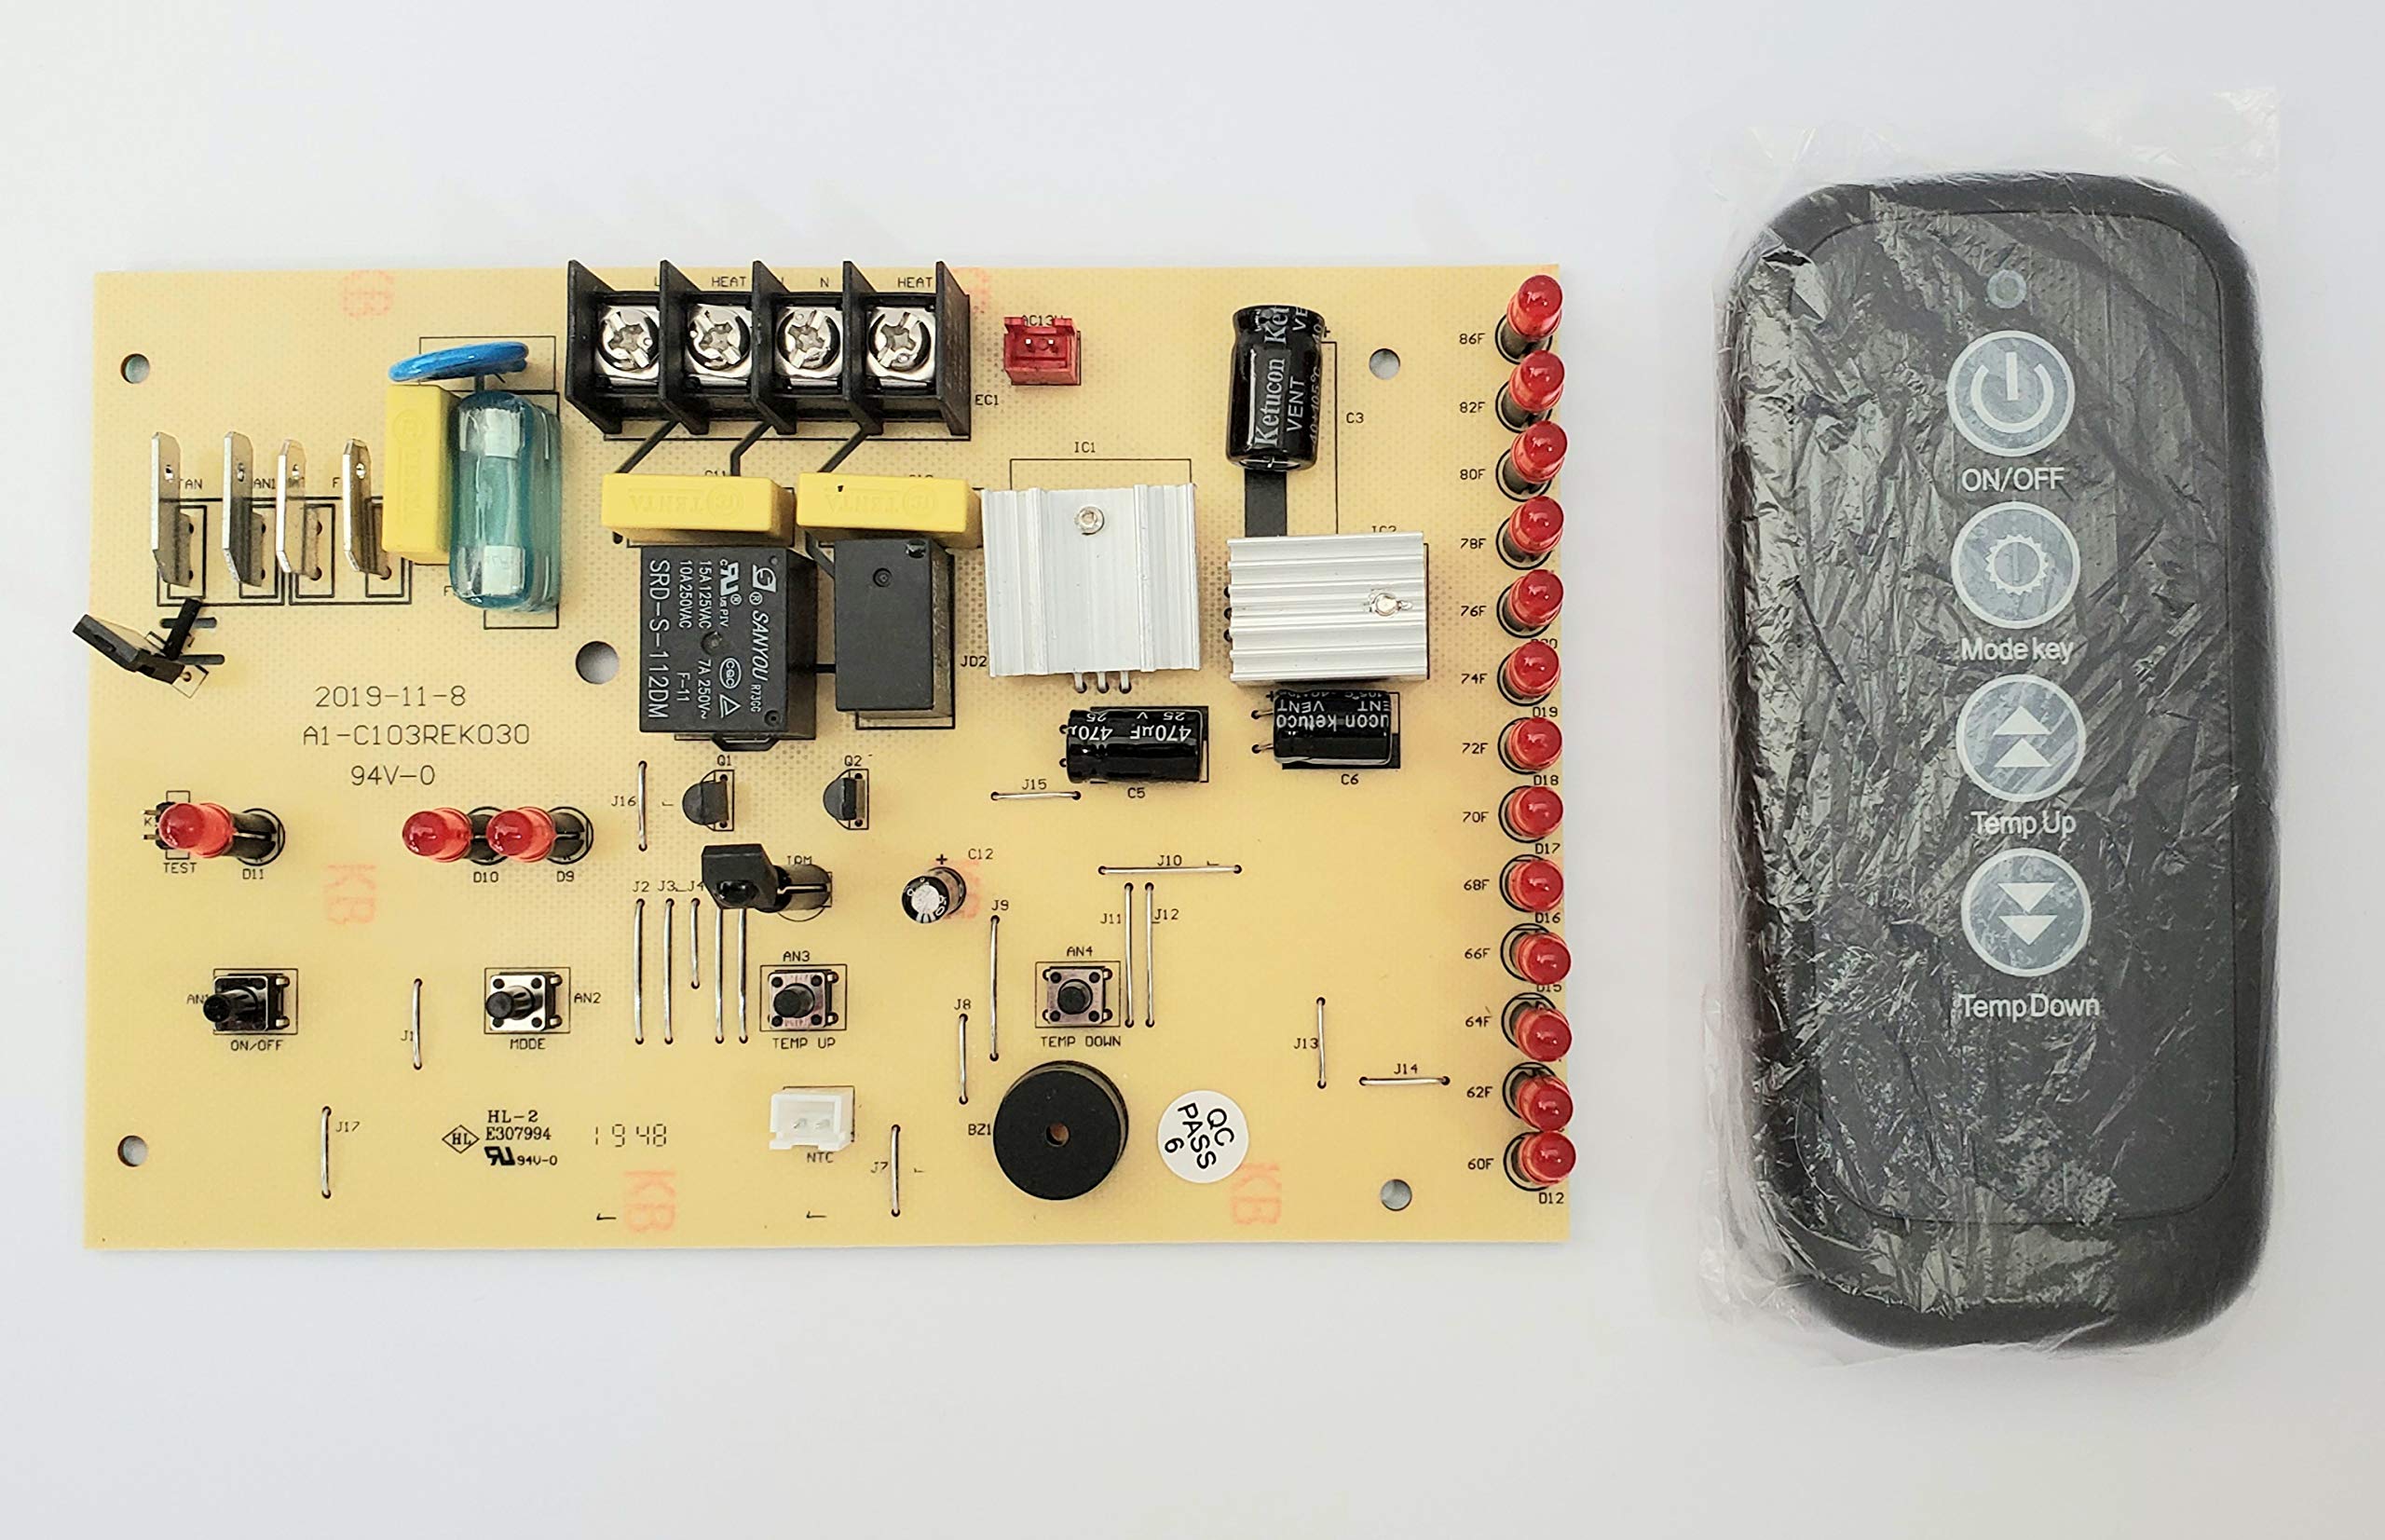 Eden PC Control Board and Remote Control - Parts for Models 1000 GEN3 and 1500 GEN3 Infrared Heaters